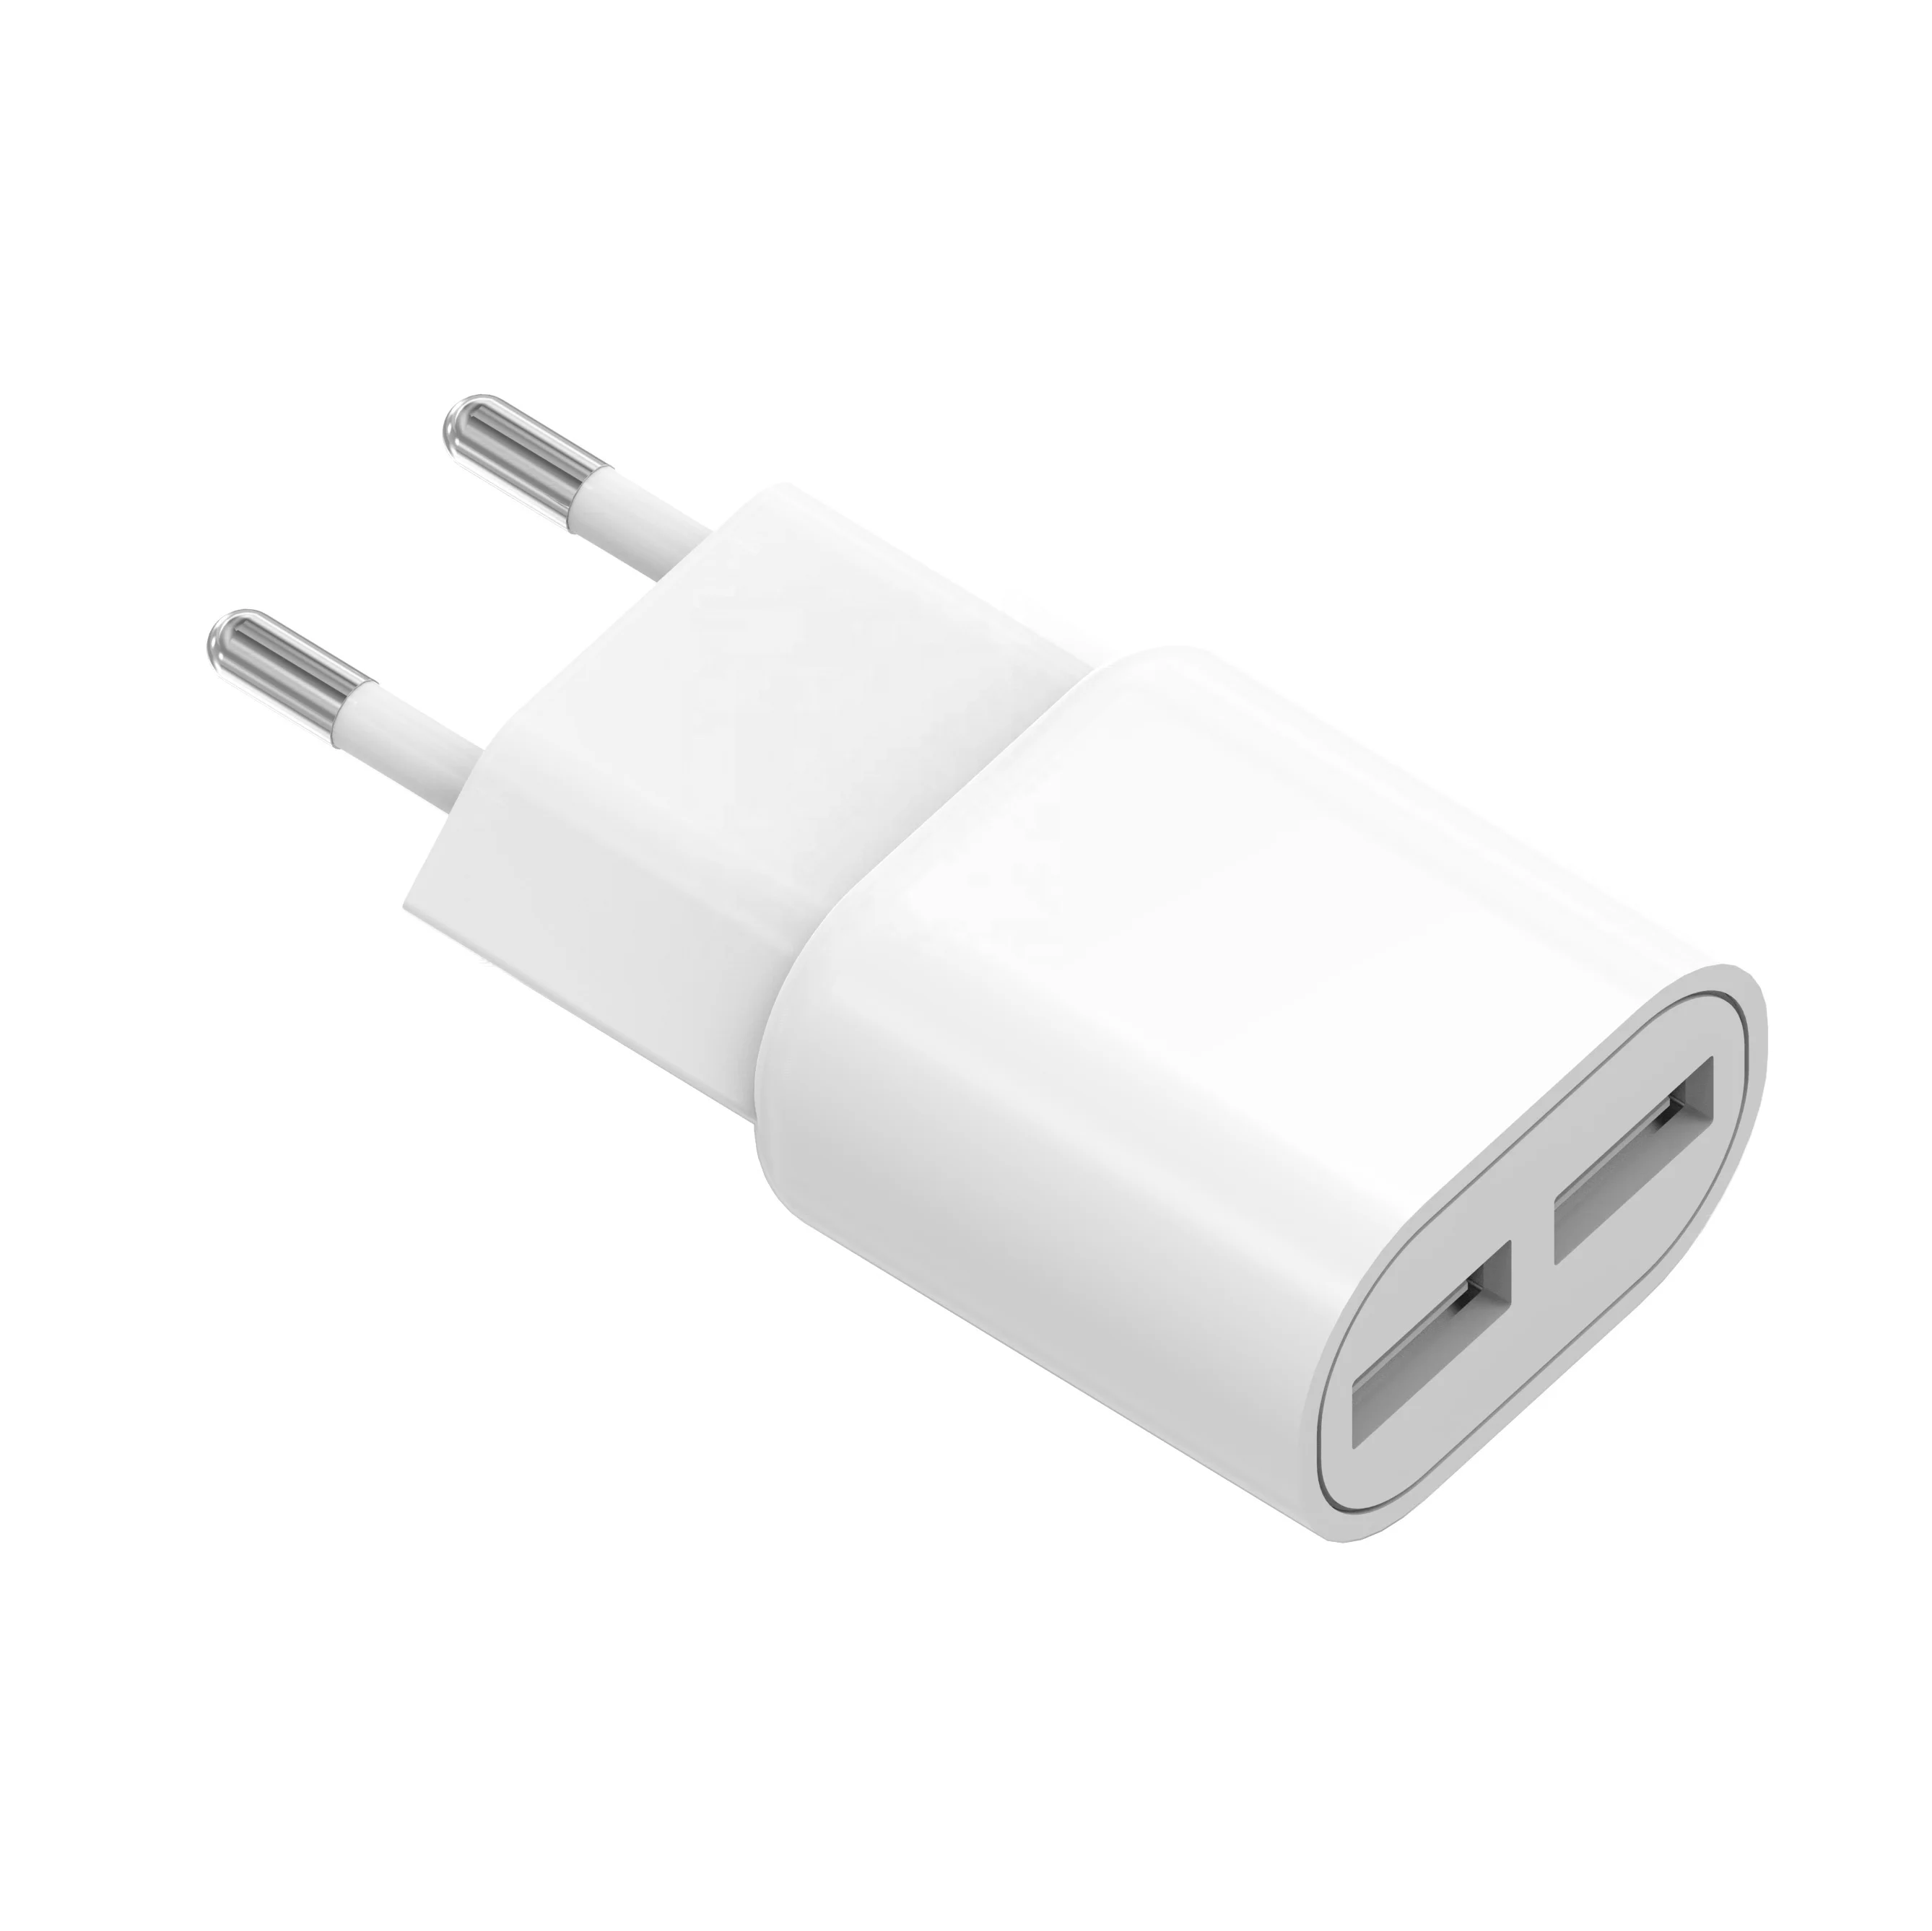 

Fast charging 2.4A Max. Mobile Phone Dual USB Wall Charger,CE/FCC/RoHS certified